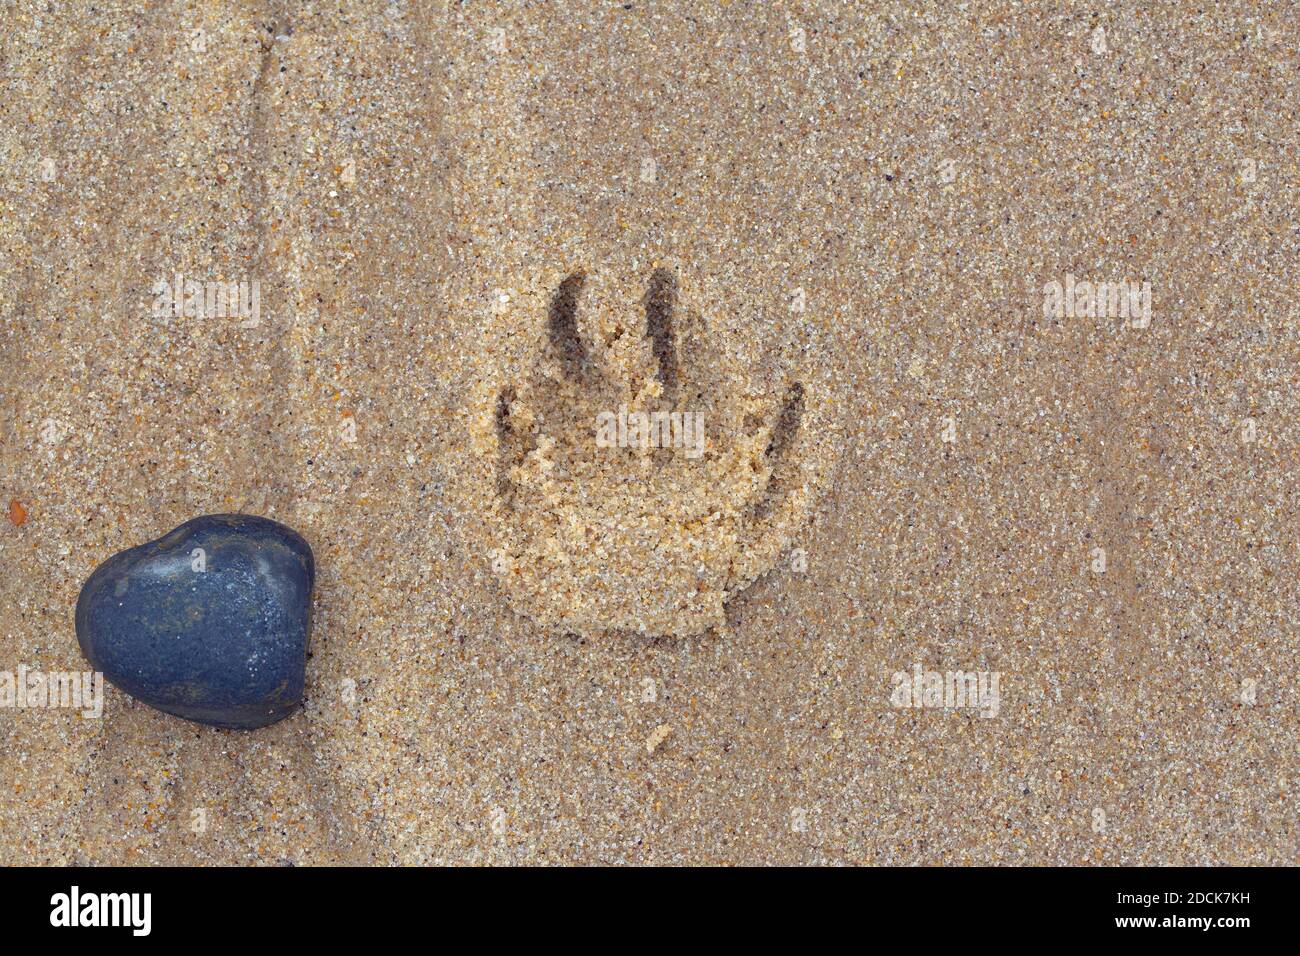 Dog paw print impression in beach sand. Alongside dark water eroded flint pebble stone., Depth of imression, shape of the claw prints suggest an older Stock Photo